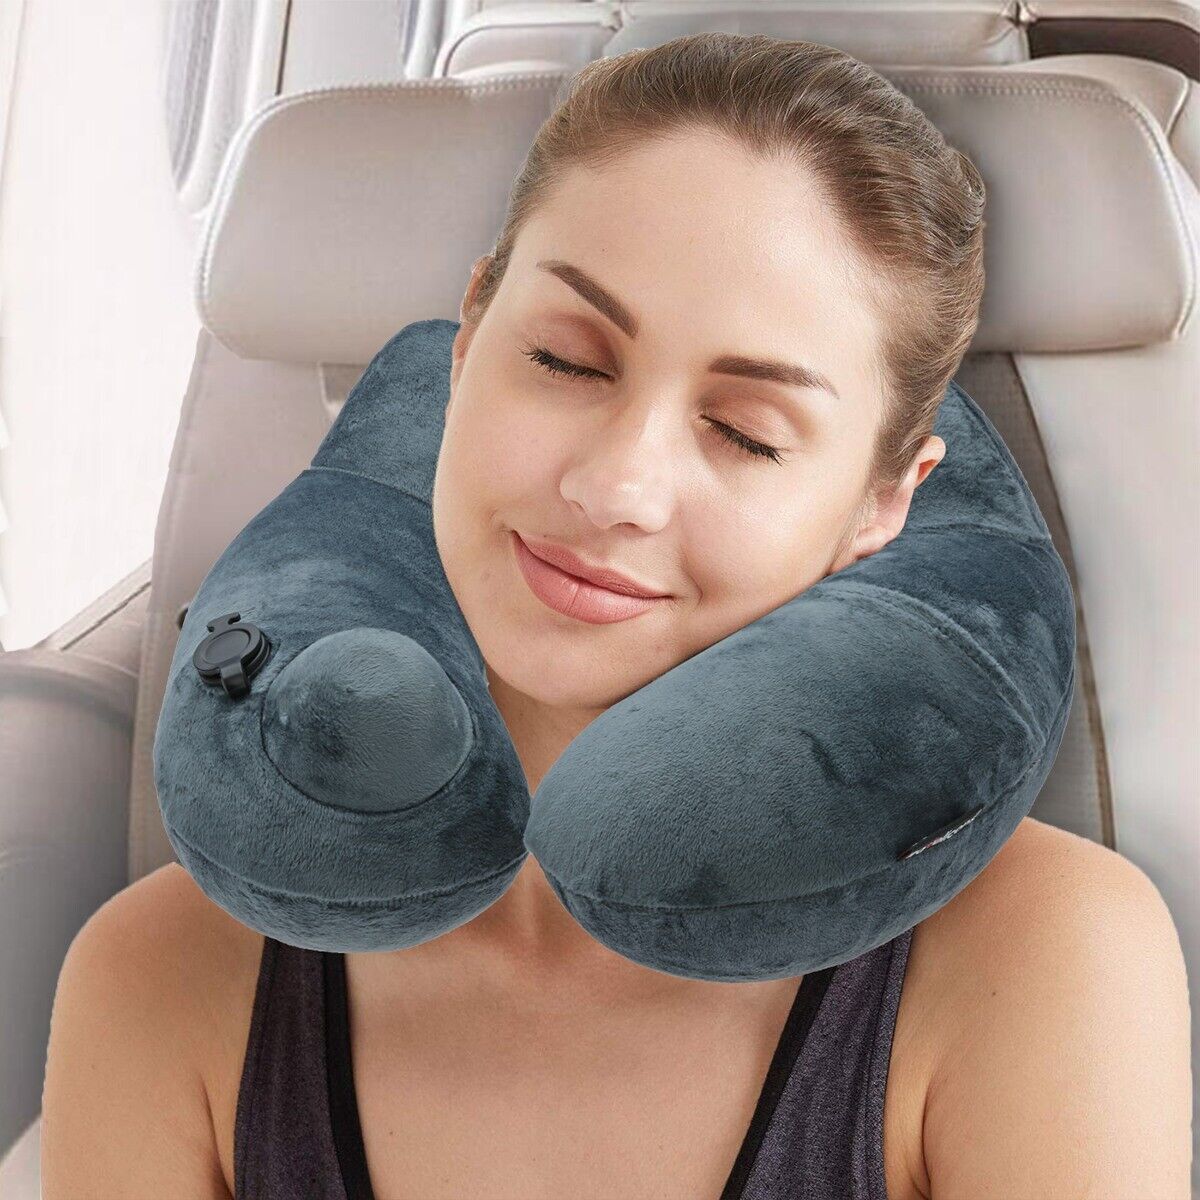 Travel Pillow Airplane Head Support